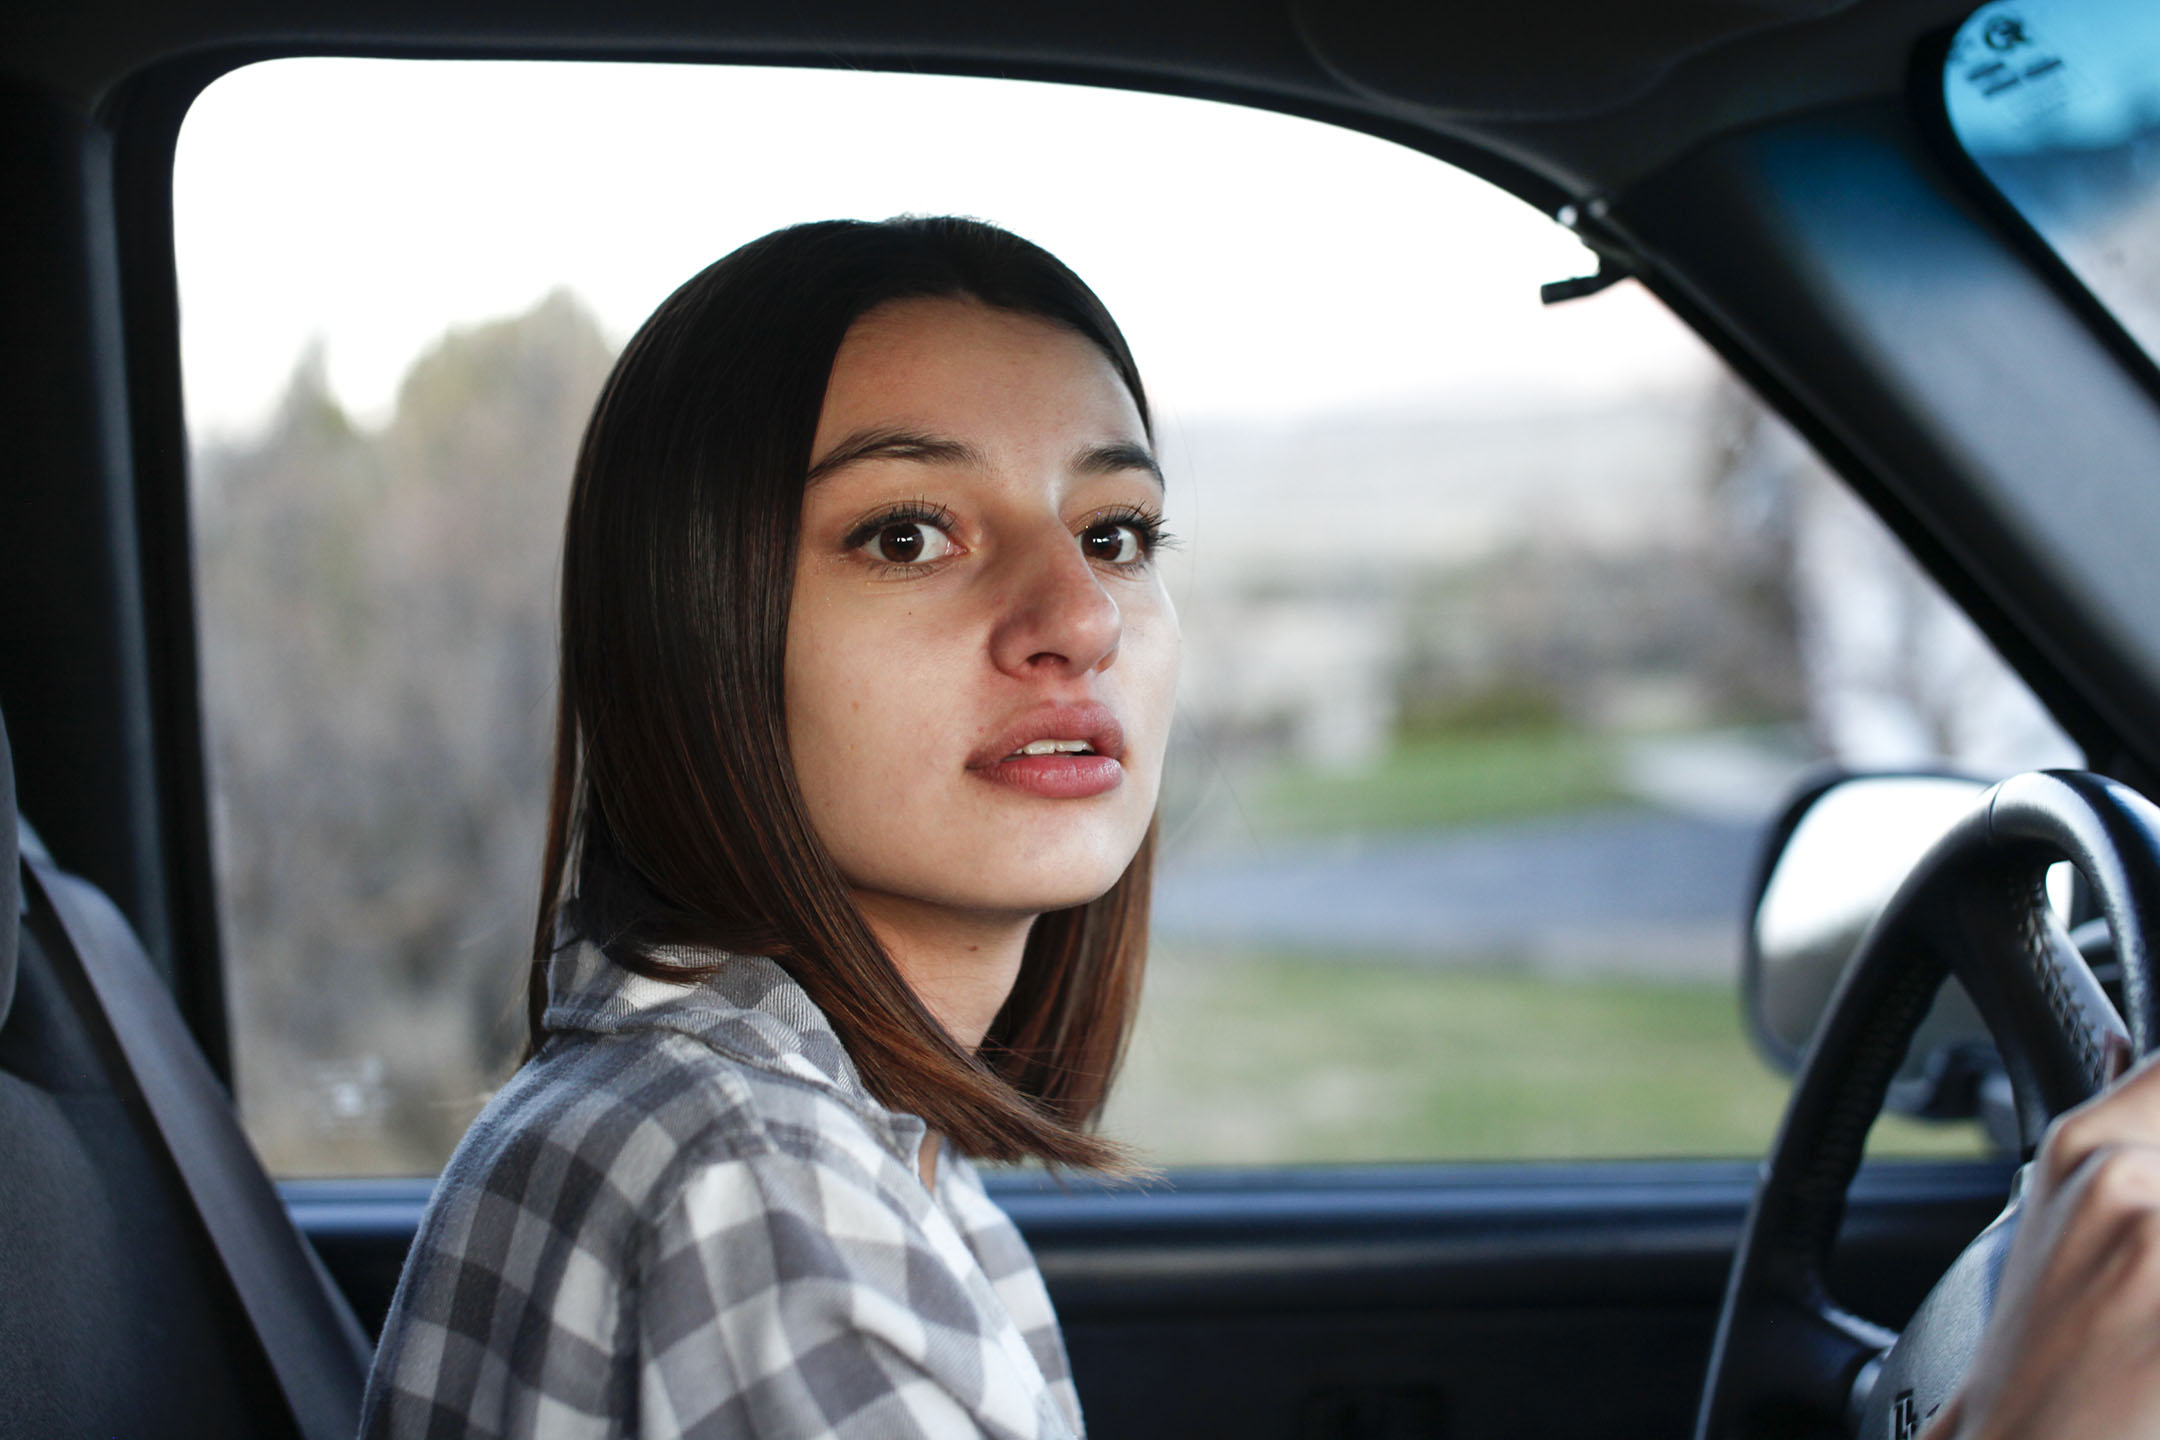 JaNessa Taylor drives herself to Polson High School most days. Her clinical depression makes getting out of bed difficult and sometimes results in absences.